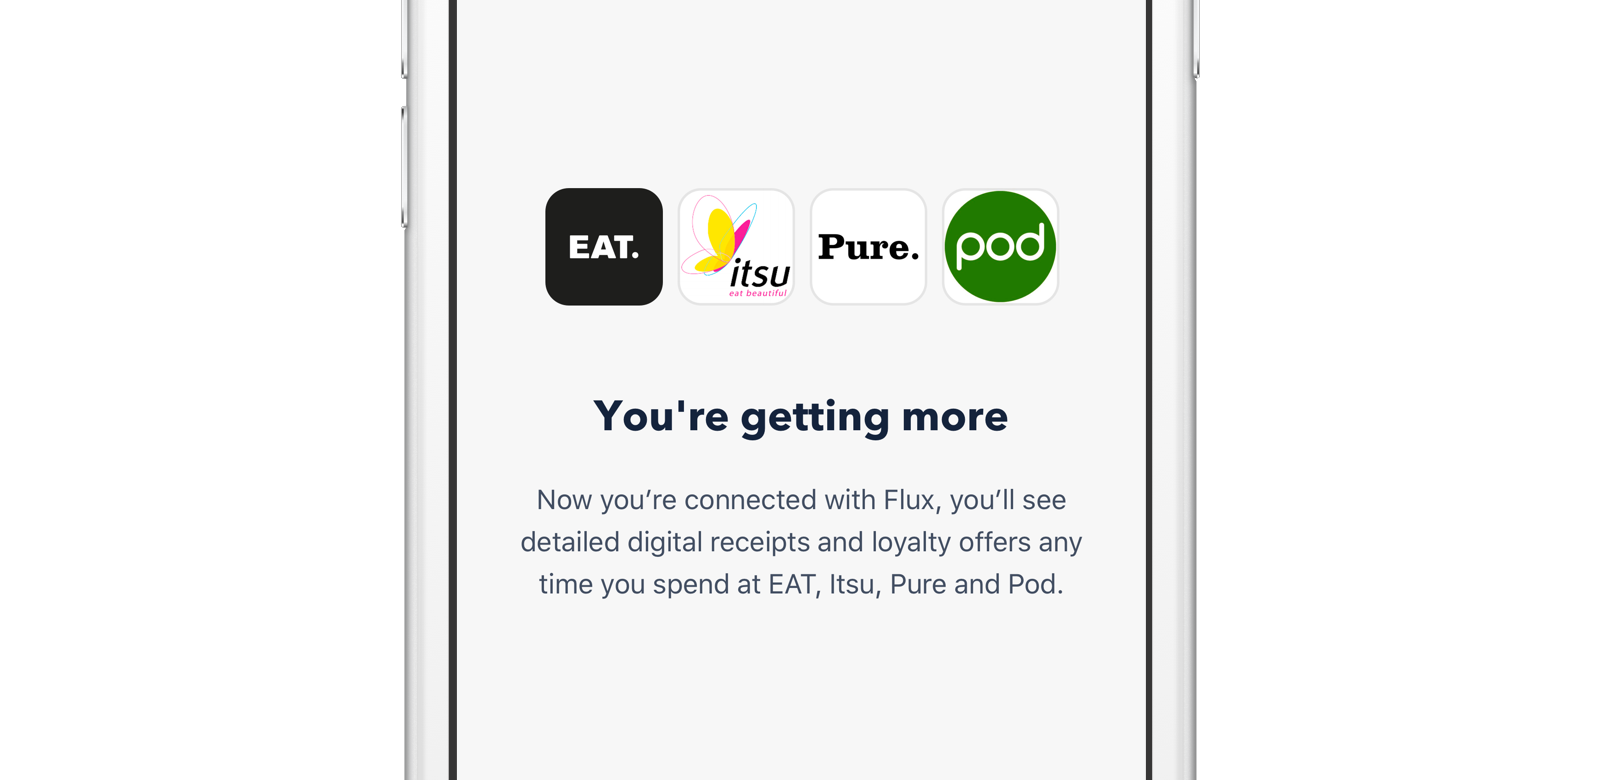 A selection of Flux retailers available through Monzo.